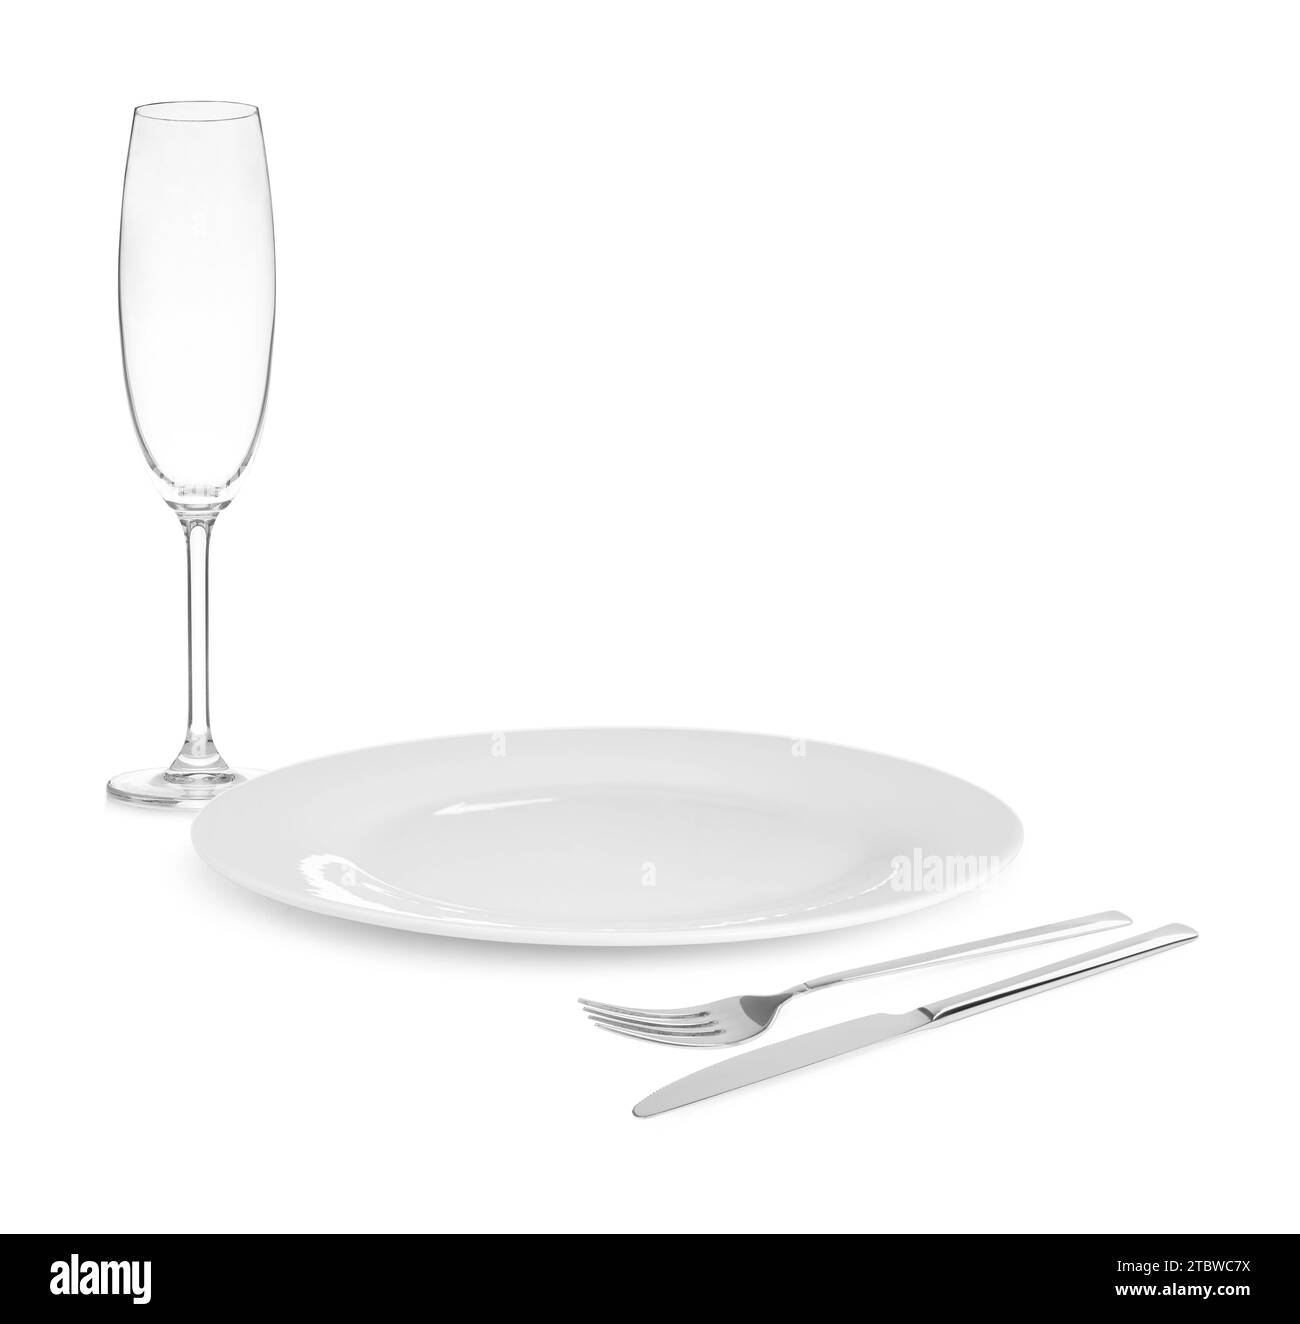 Clean plate, cutlery and glass on white background Stock Photo